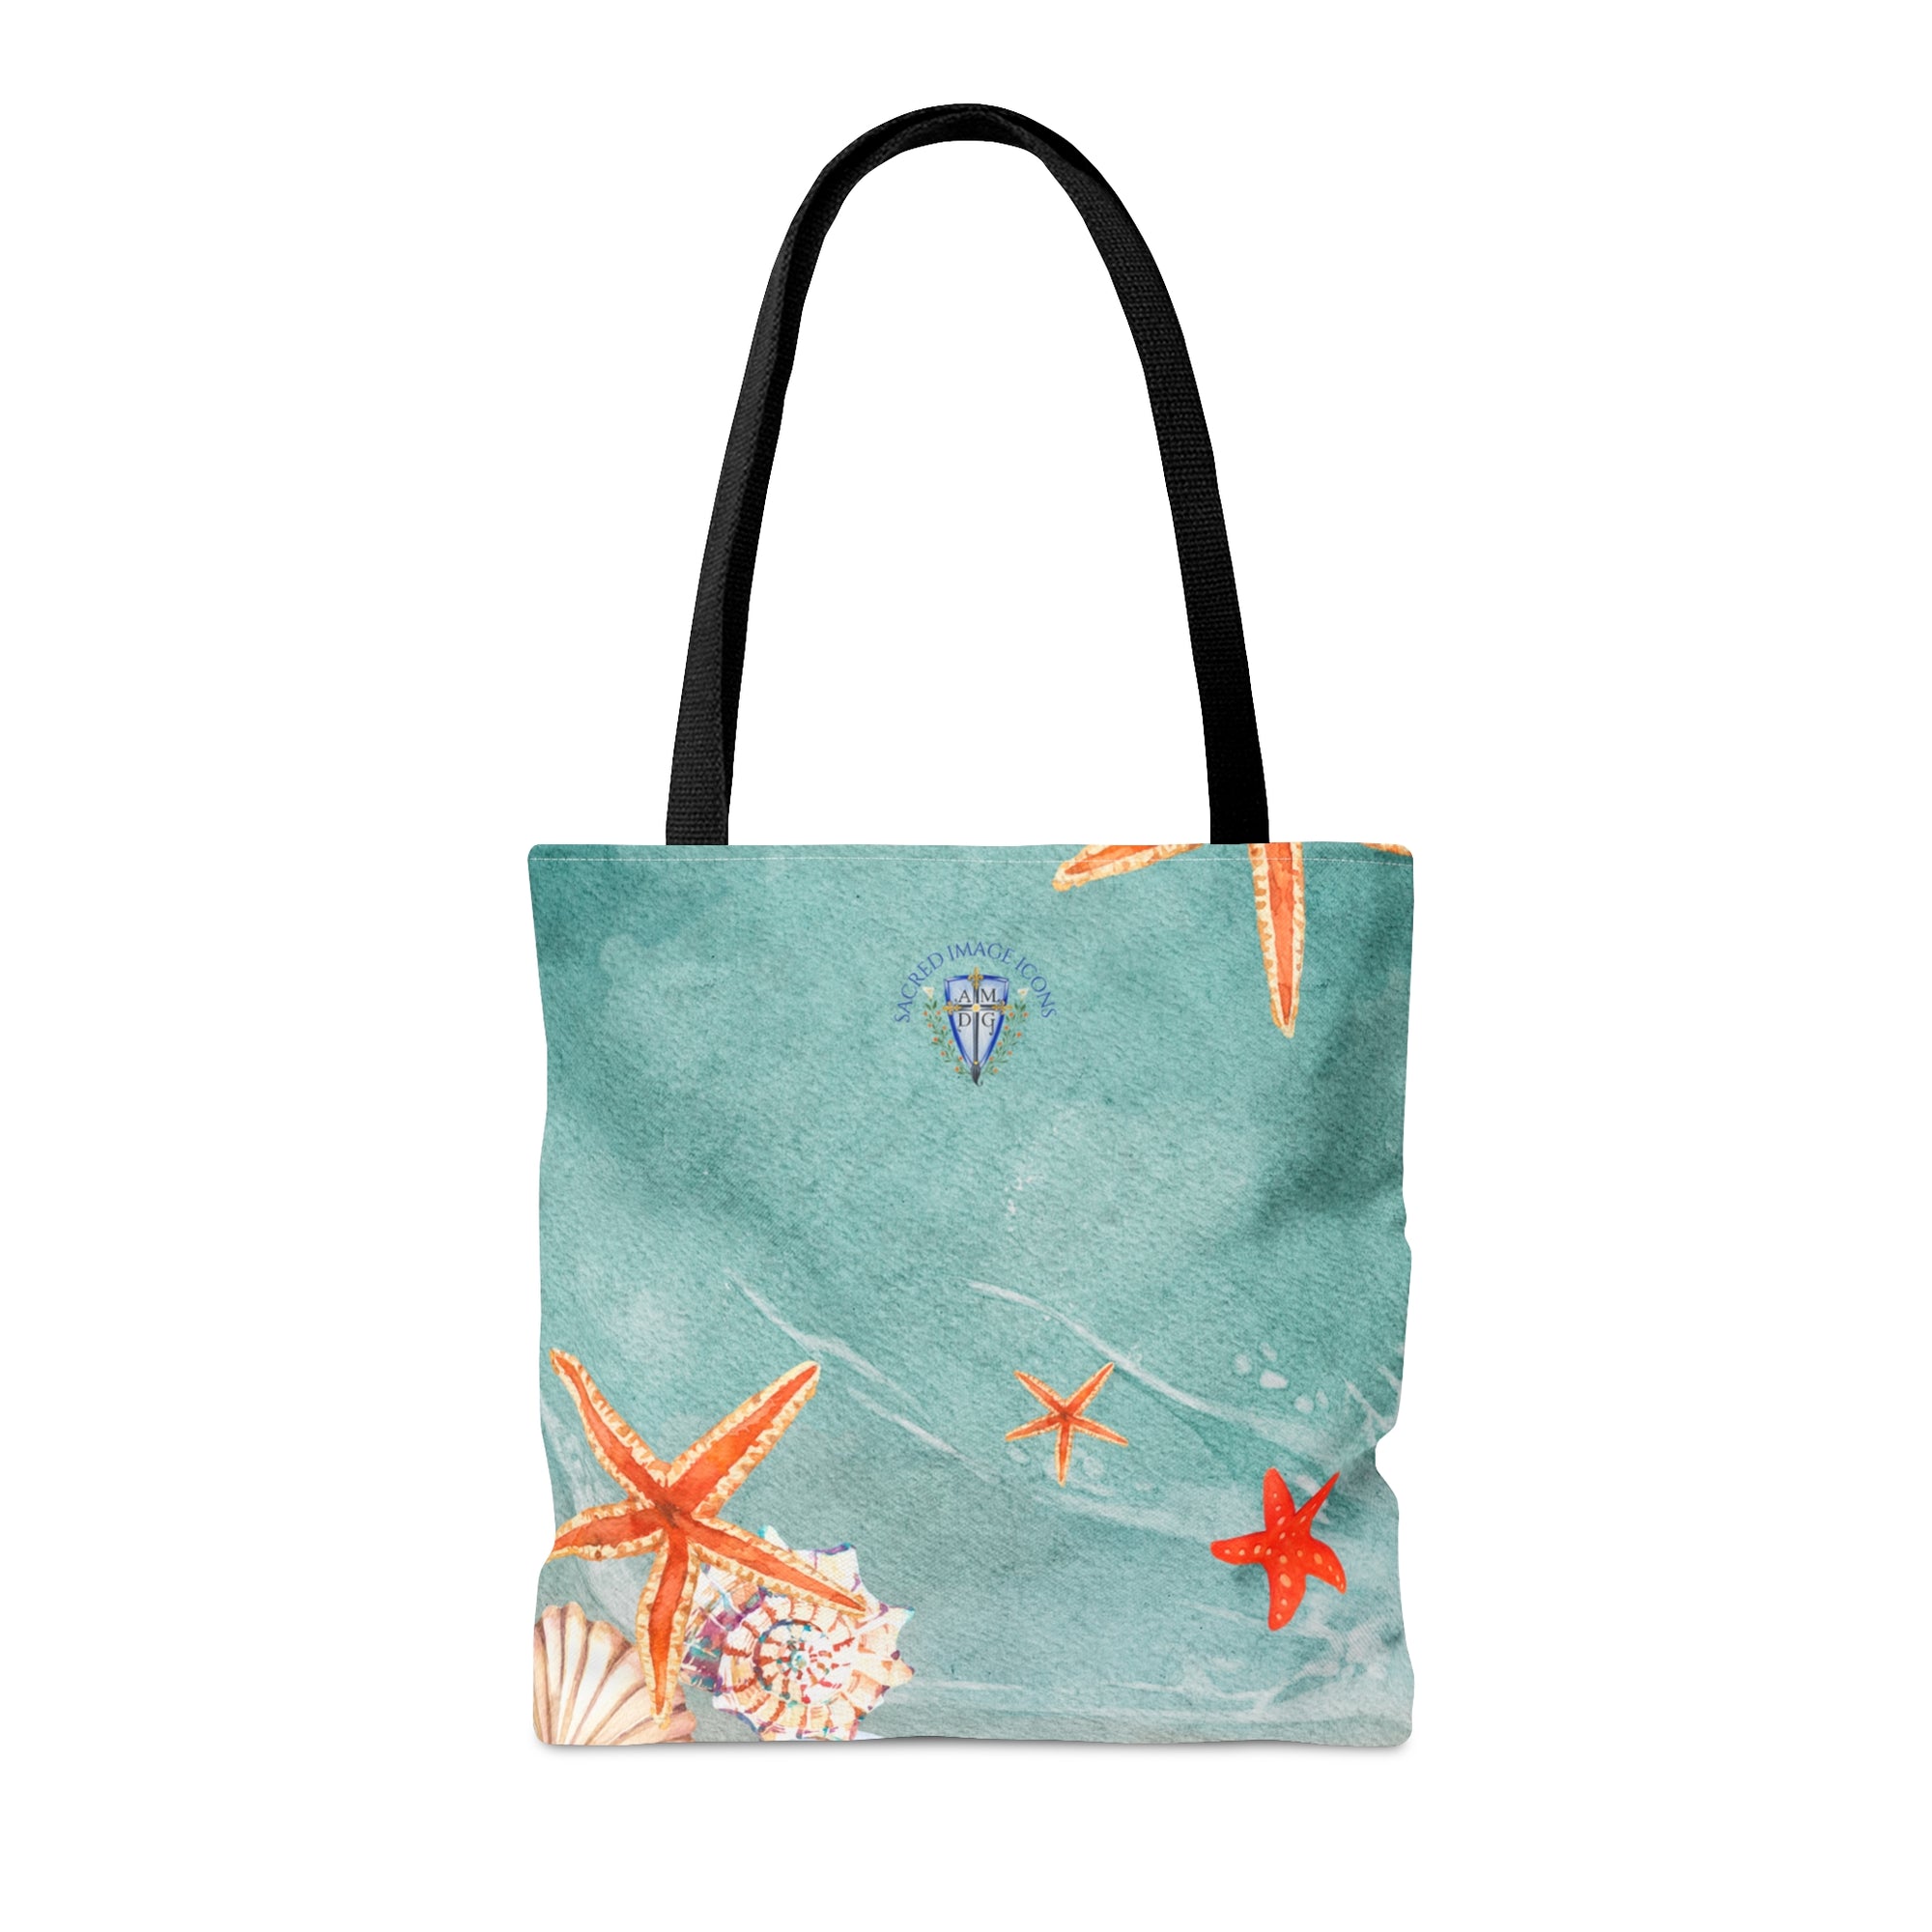 Our Lady Star of the Sea 16"x16" Tote Bag